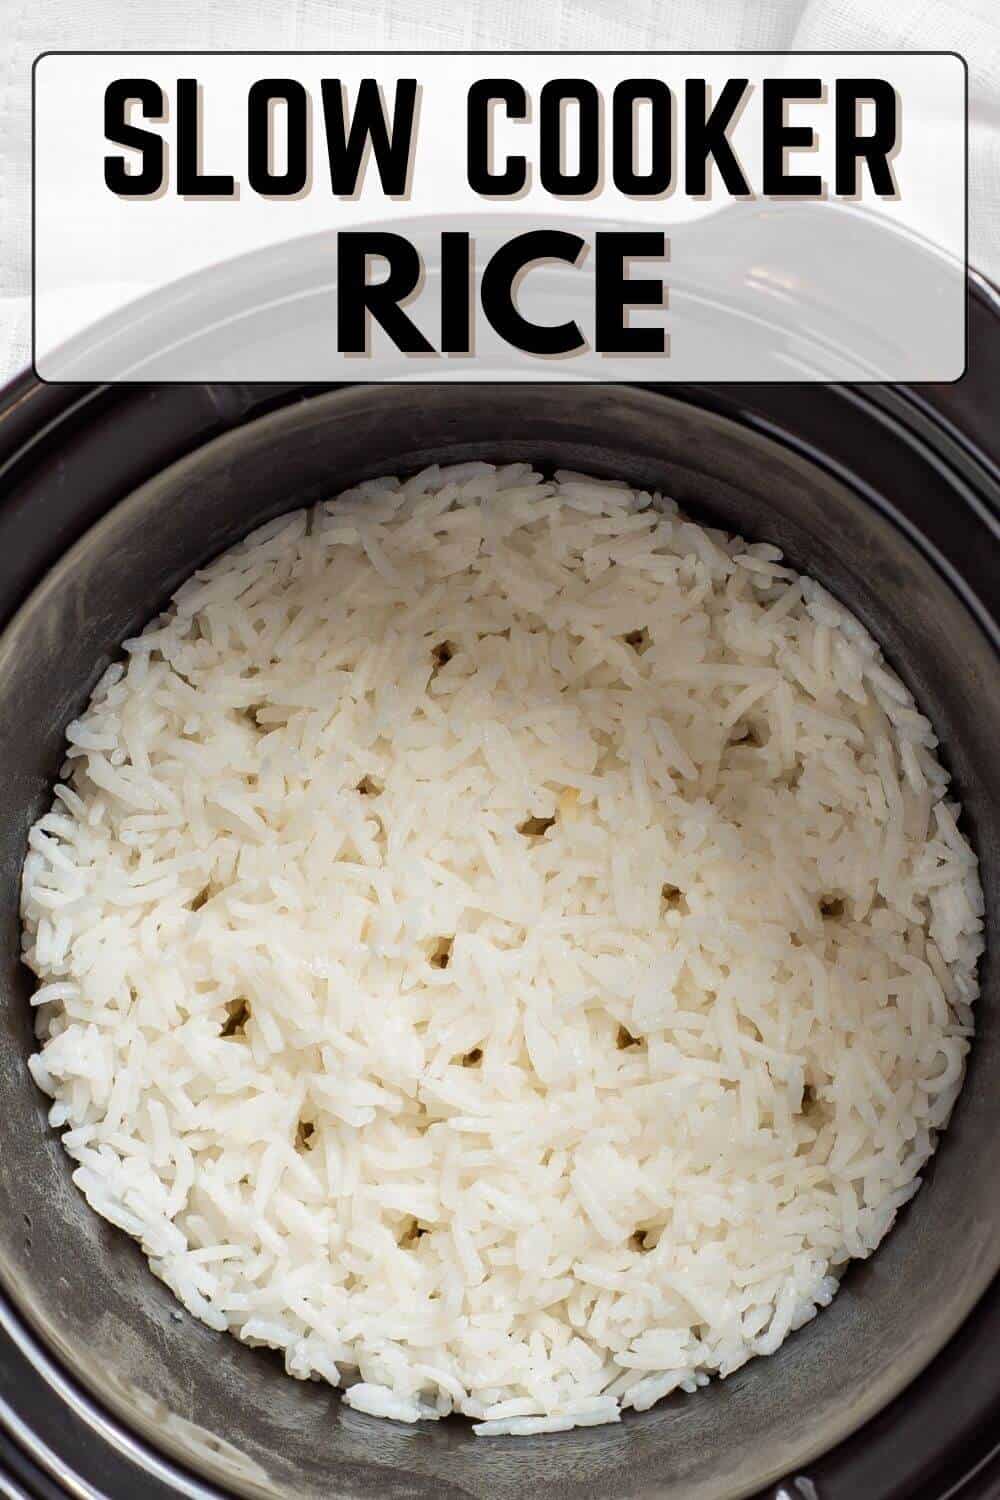 Slow cooker rice in a white bowl.